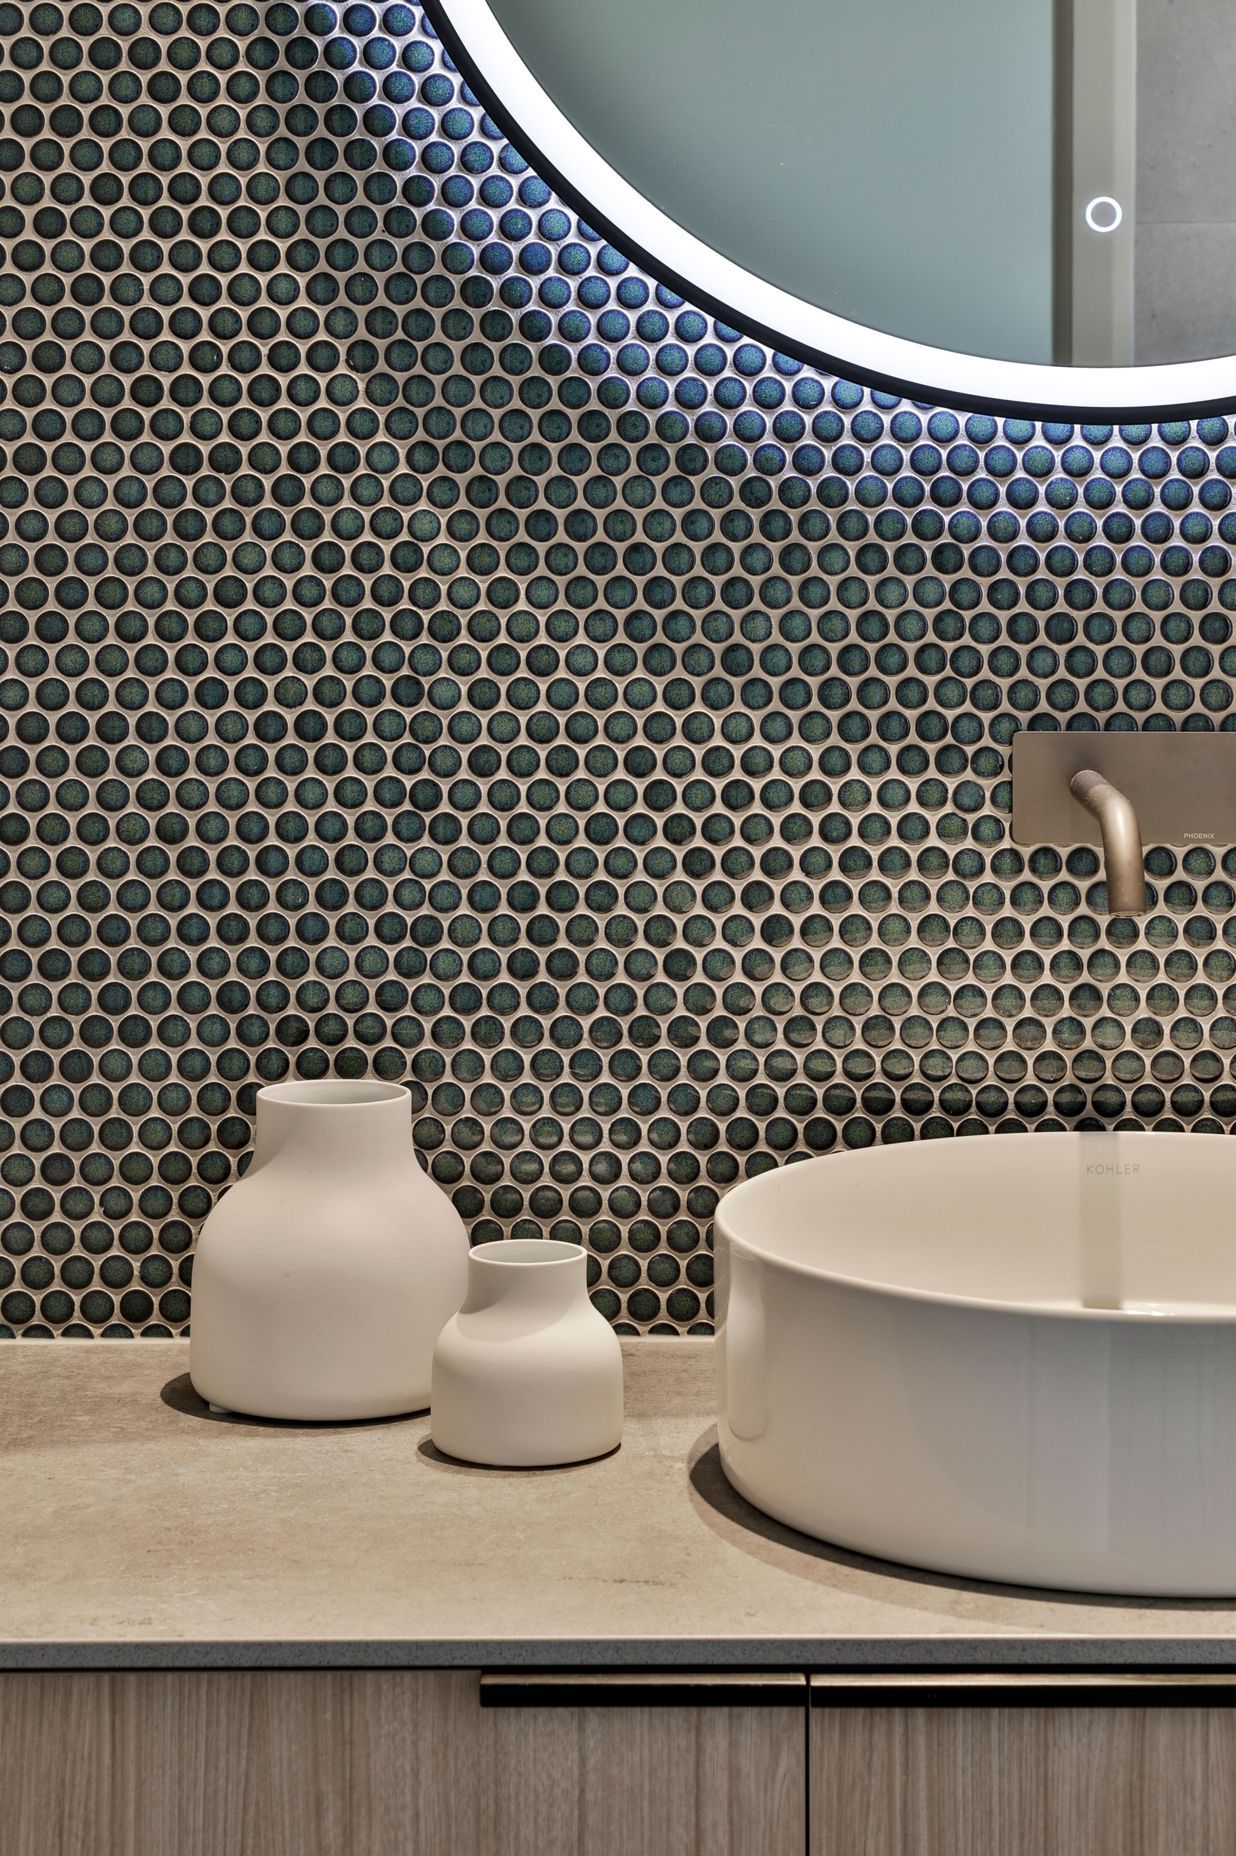 Design by Cube Dentro. Tiles: Mosaix Penny Round Jade.